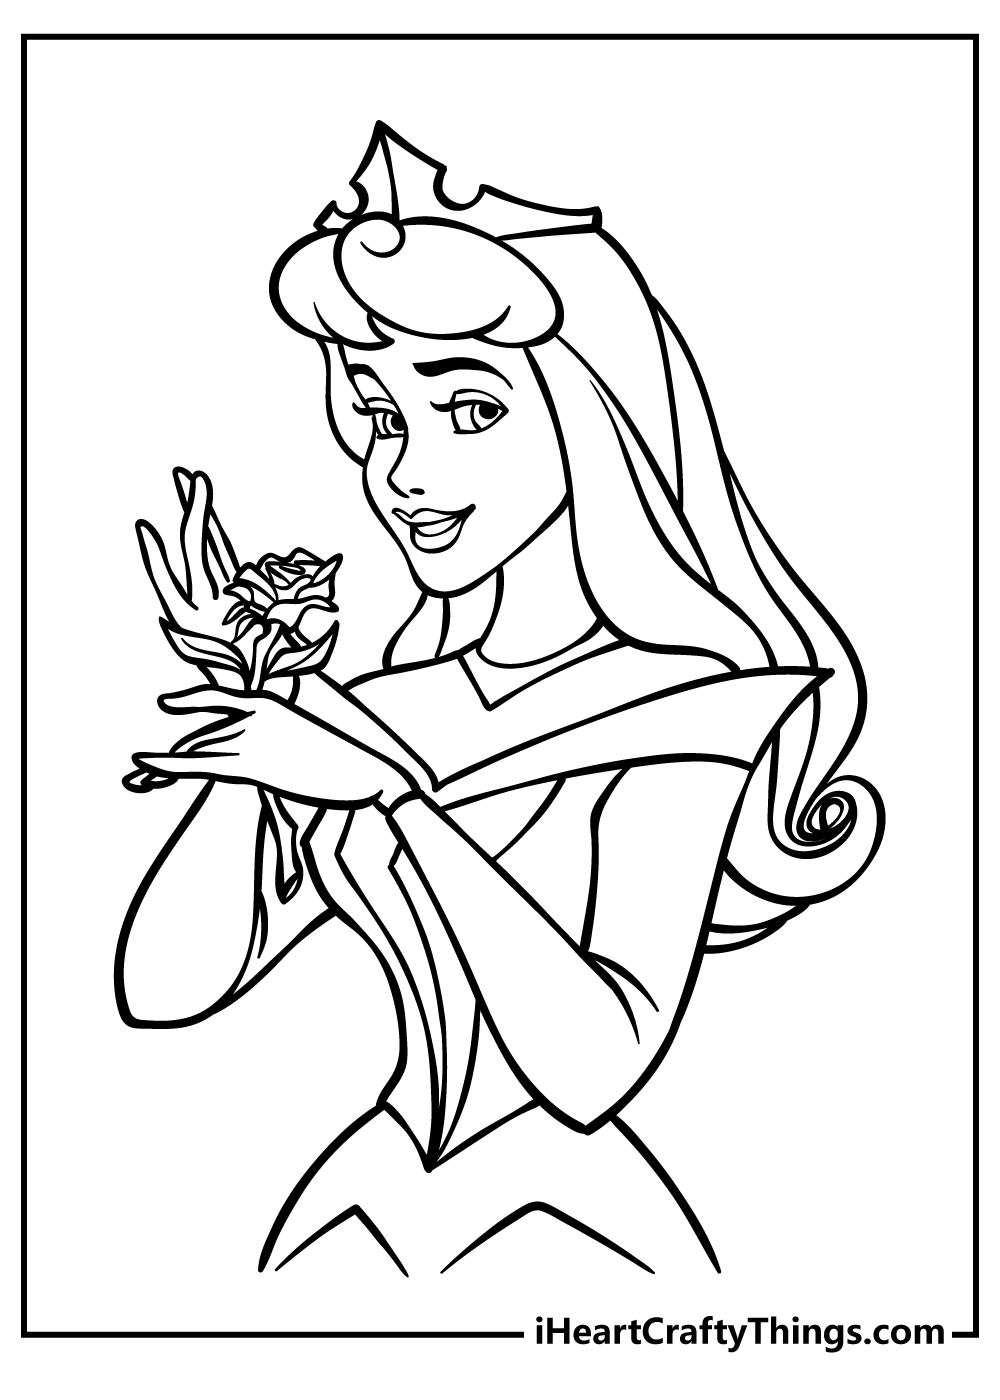 Printable Sleeping Beauty Coloring Pages Updated 20